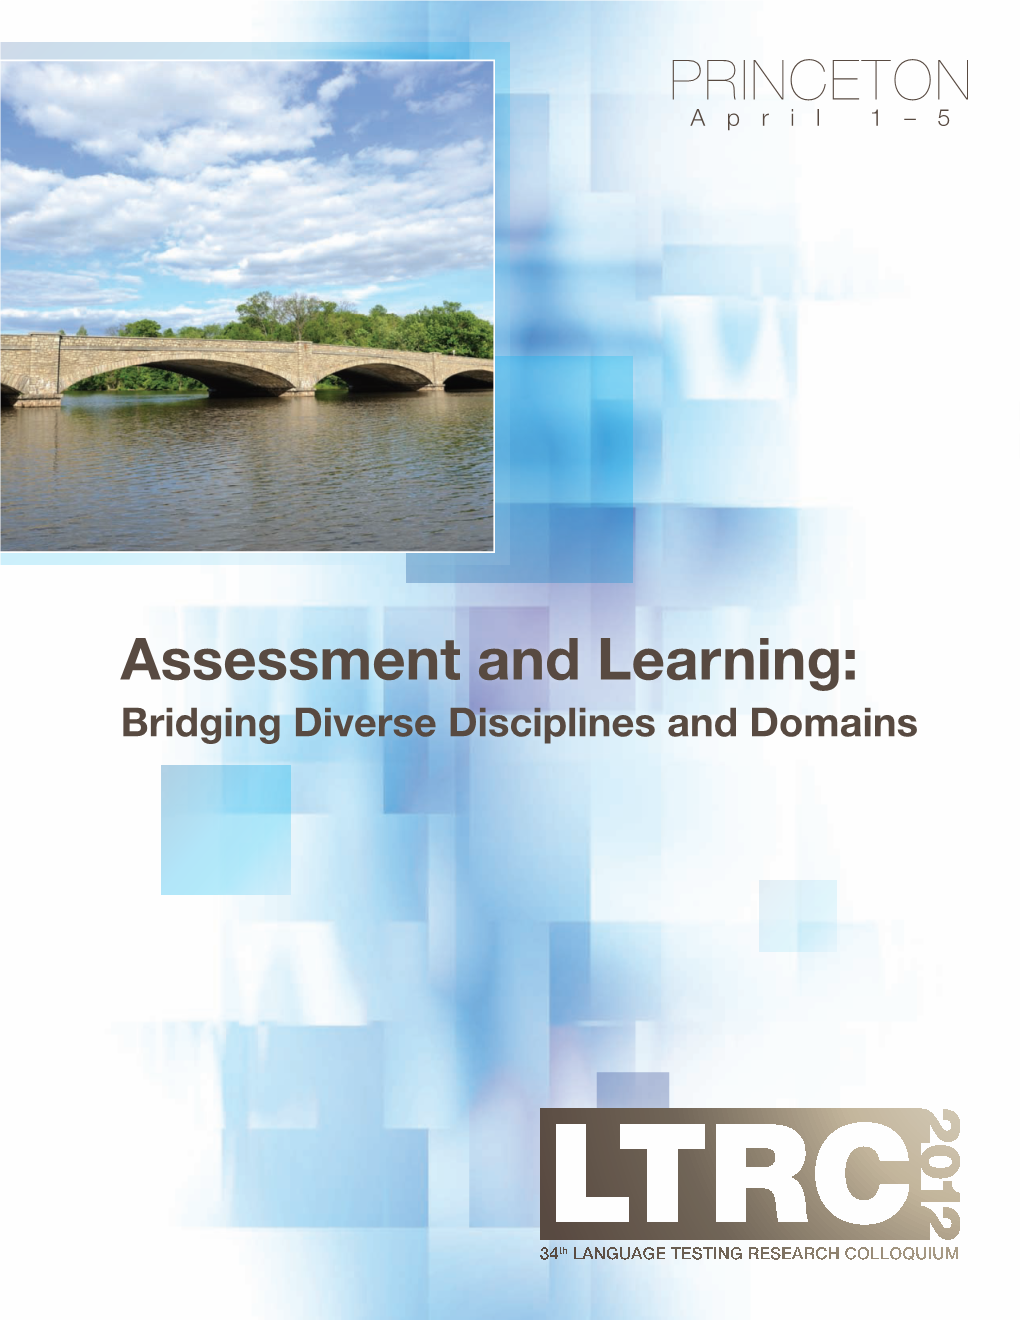 Assessment and Learning: Bridging Diverse Disciplines and Domains